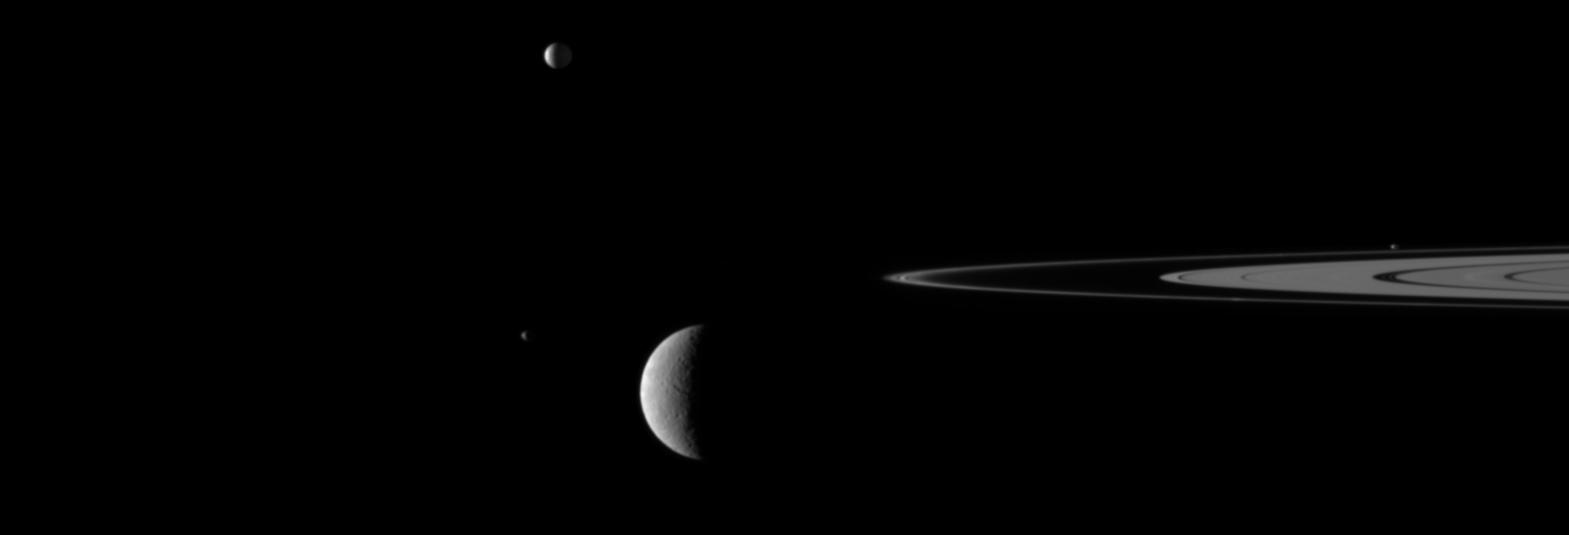 A gaggle of moons parade around Saturn's rings in this movie from Cassini in which the large moon Rhea passes in front of the small moon Janus.